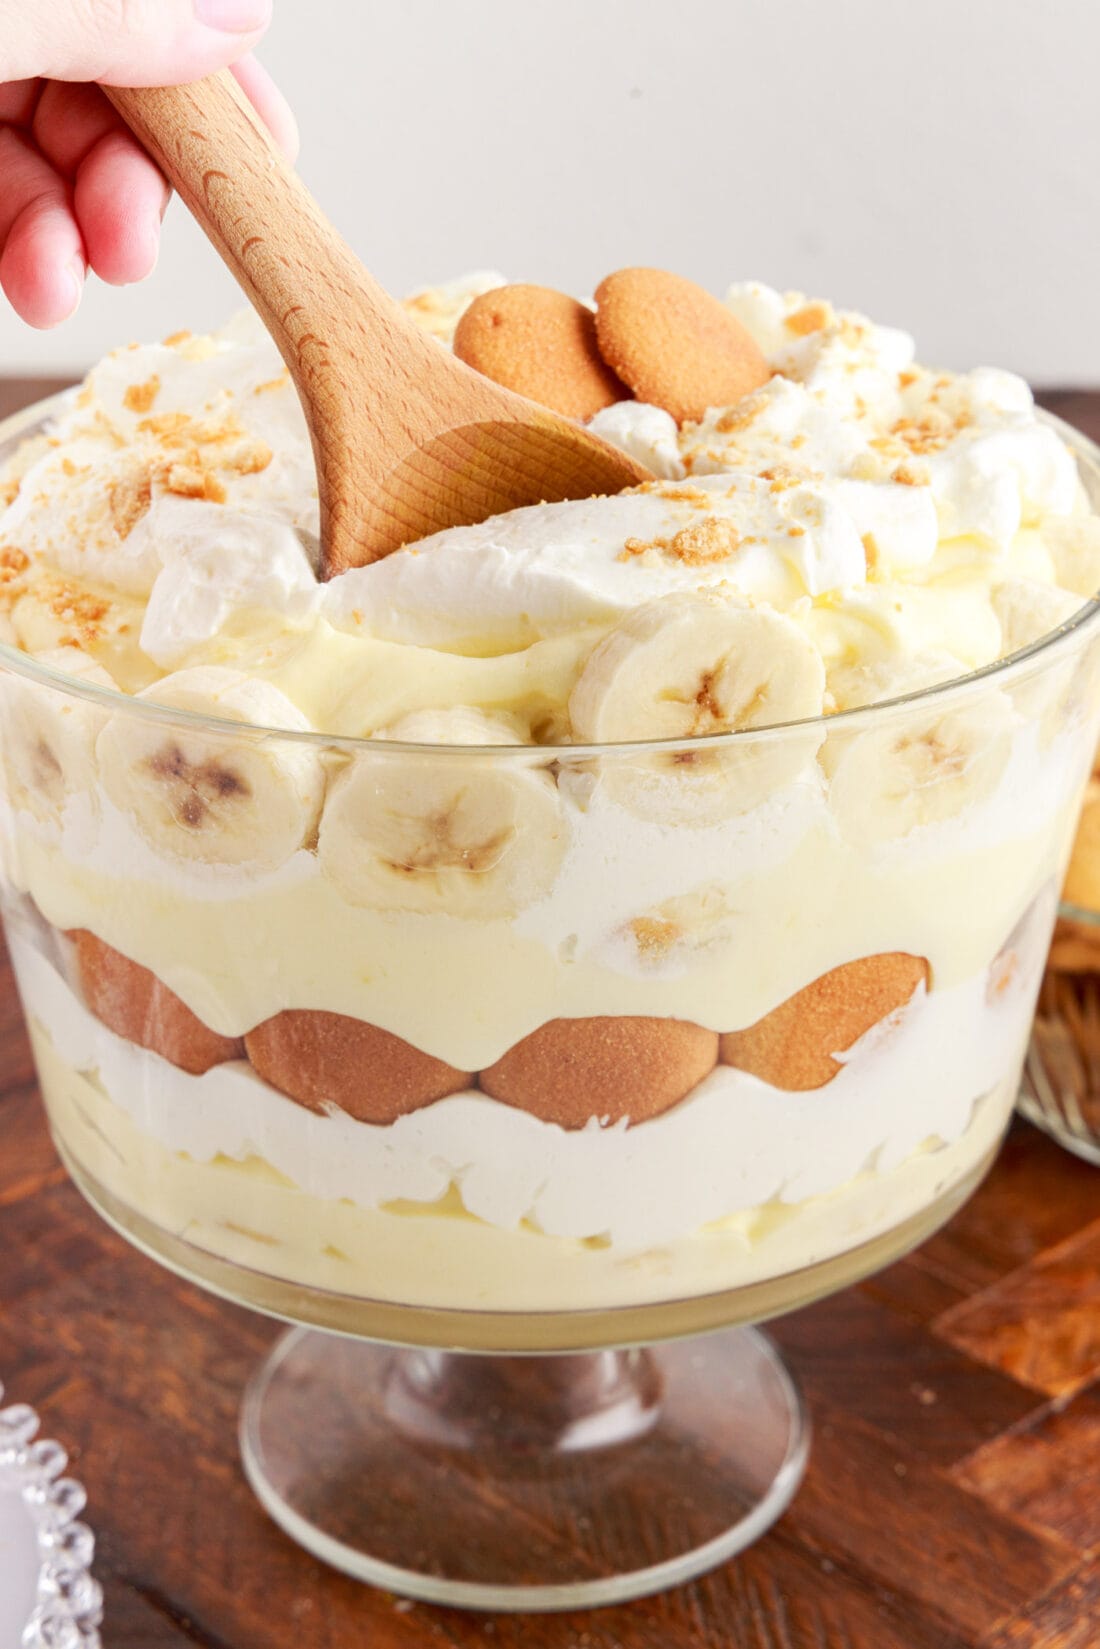 Serving spoon in a Banana Trifle